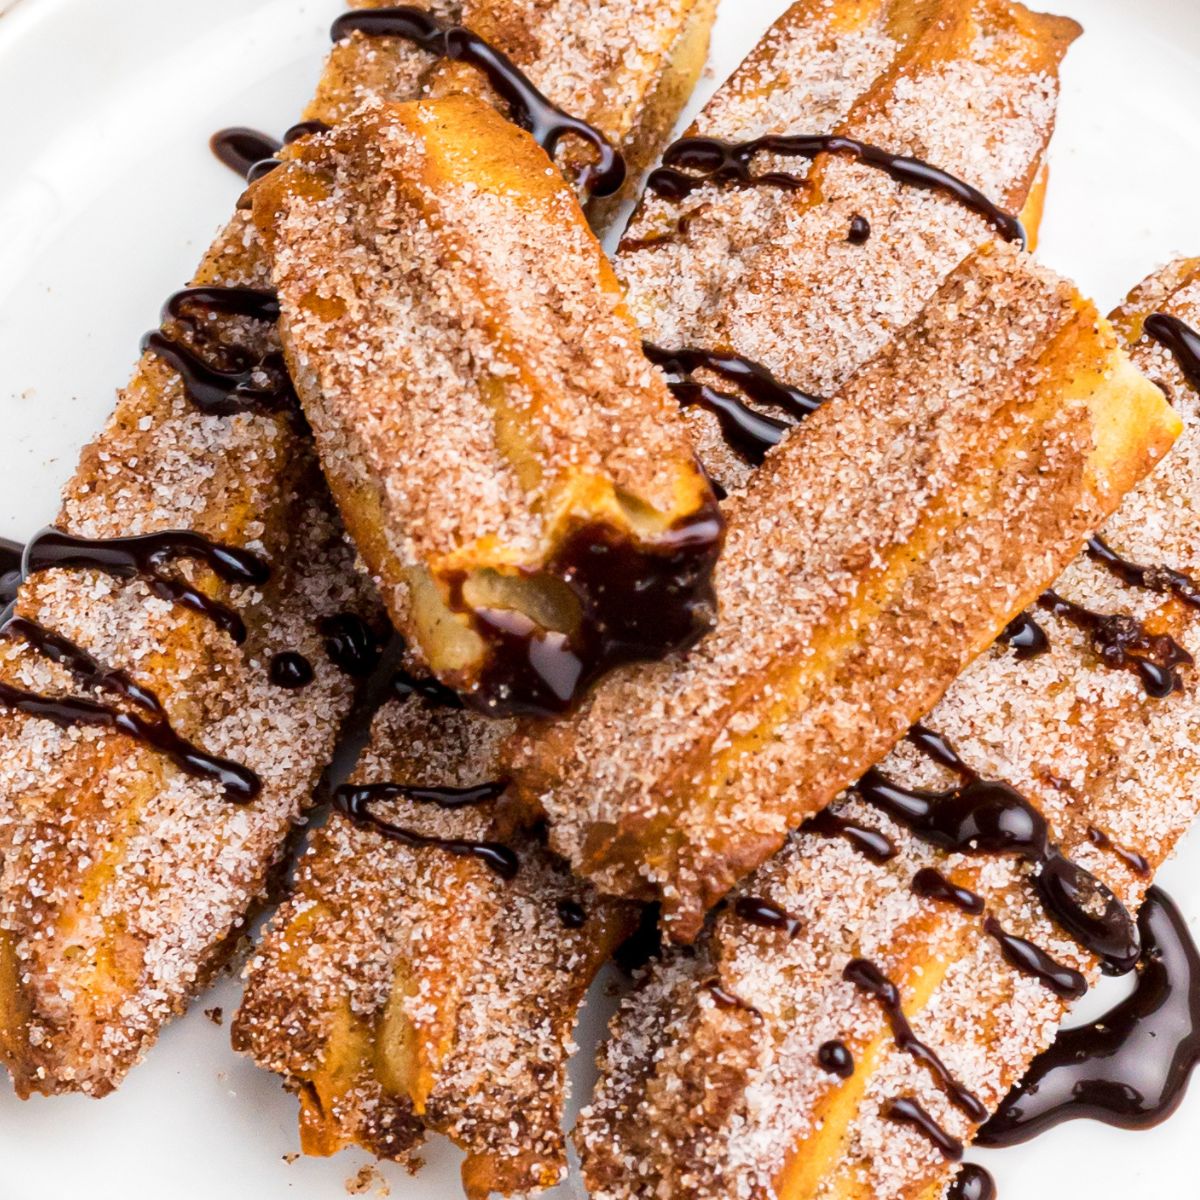 Golden sugar and cinnamon coated churros on a white plate drizzled with chocolate